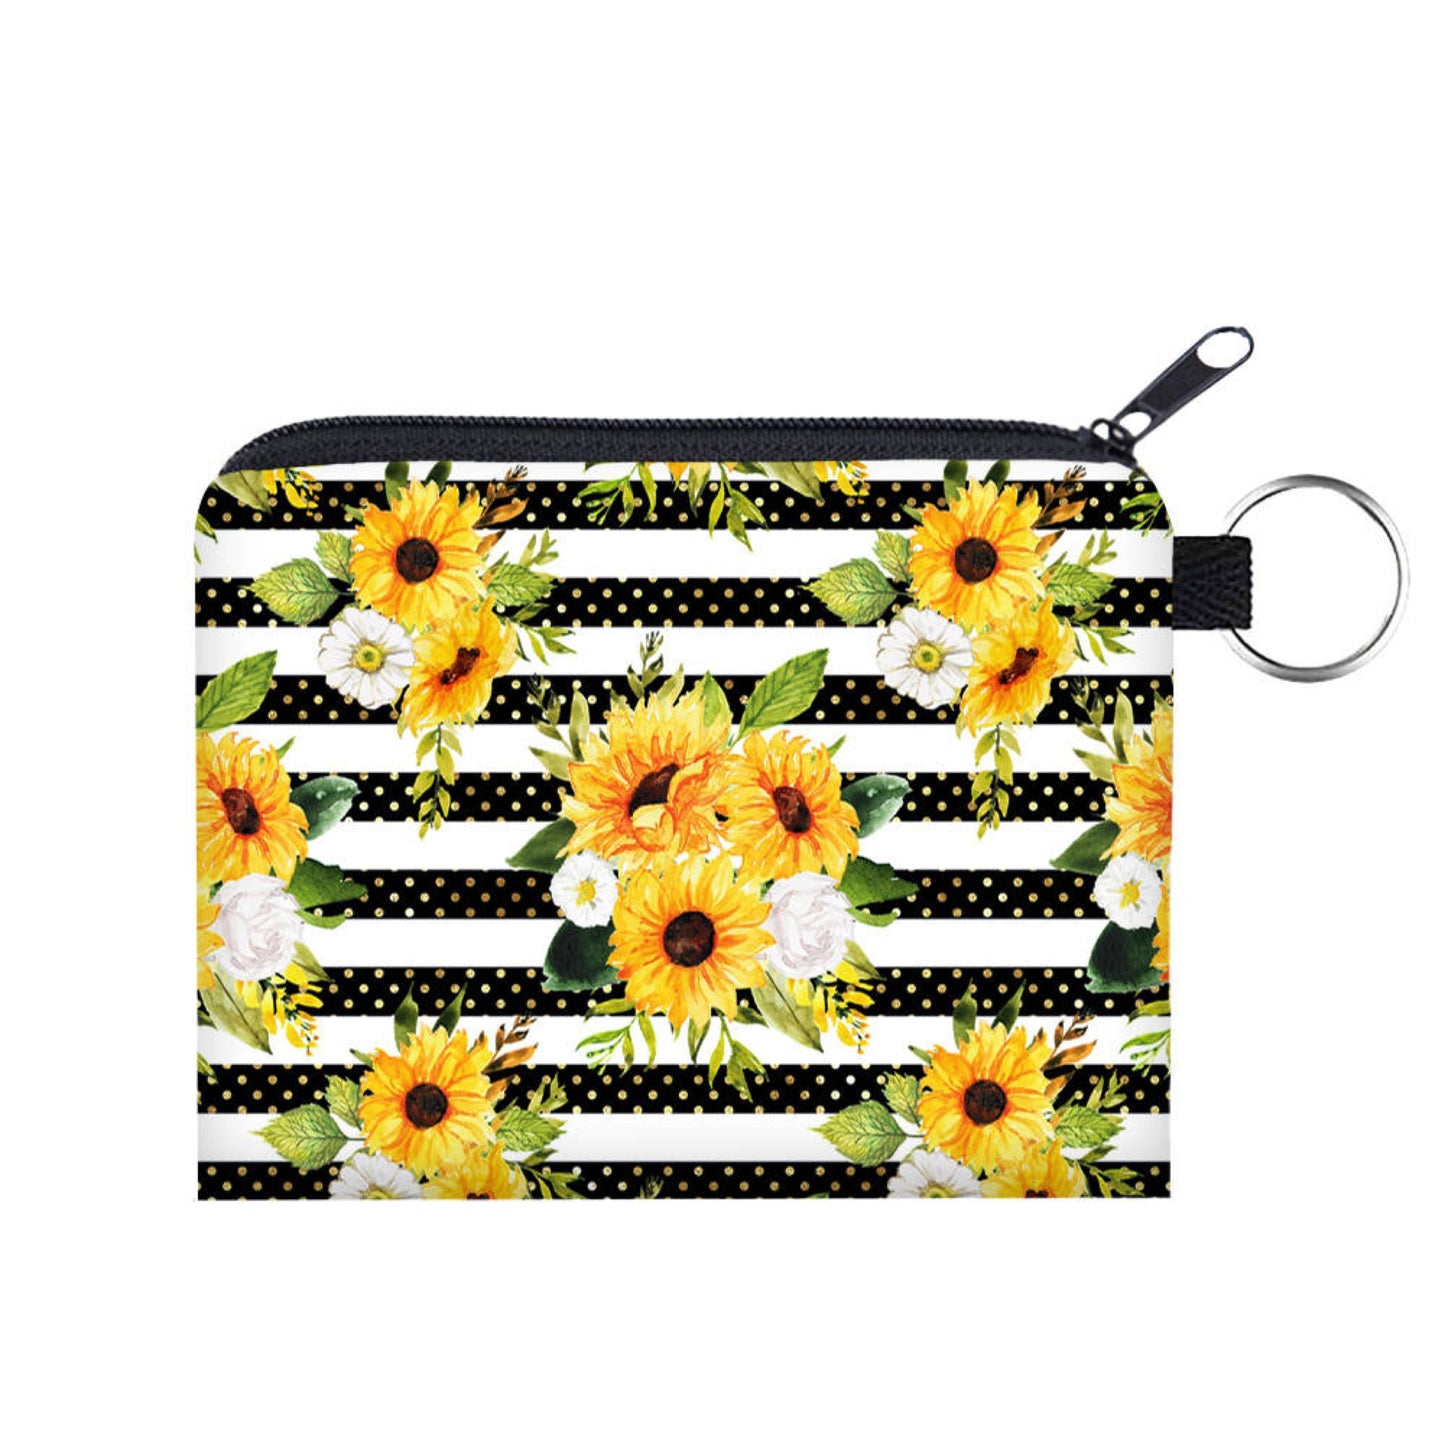 Pouch - Card & Coin Purse - Sunflower Mix LOCAL PICK UP OPTION